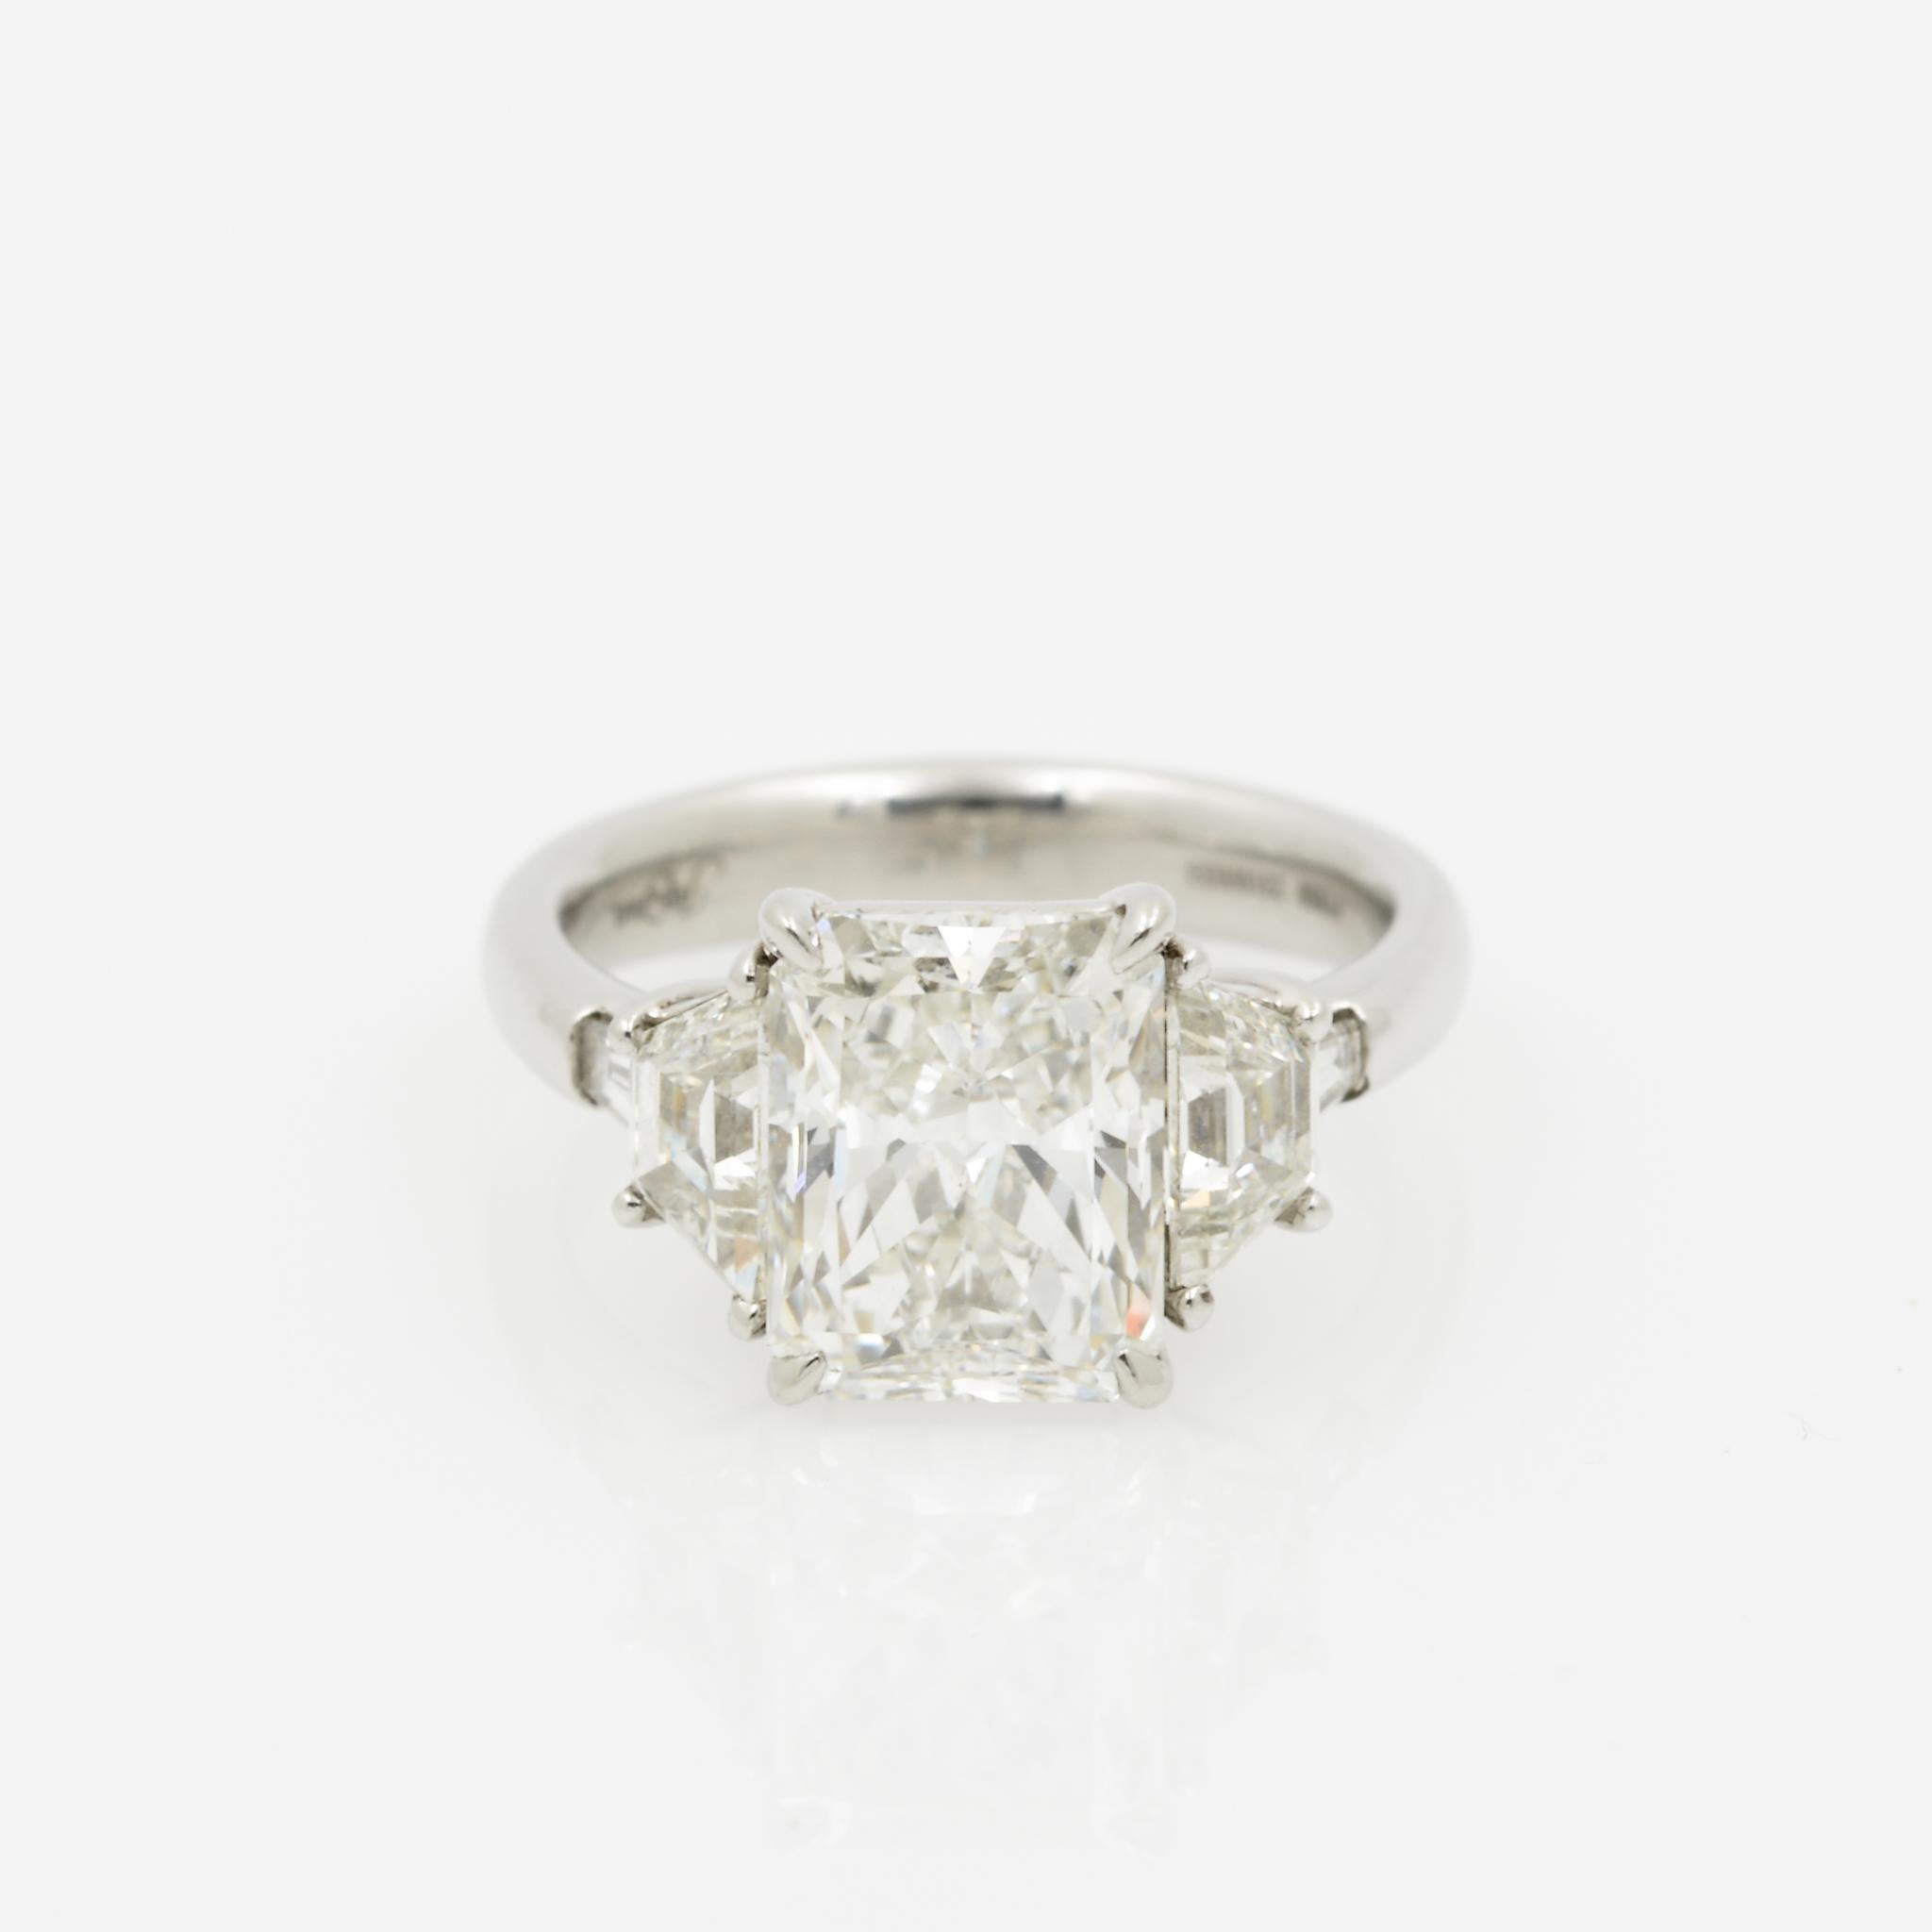 This platinum five-stone ring features a 3.51 carat GIA certified radiant cut diamond with G coloring and SI1 clarity at its center. On either side of the main stone are two trapezoid diamonds with a combined total weight of 0.90 carats, as well as